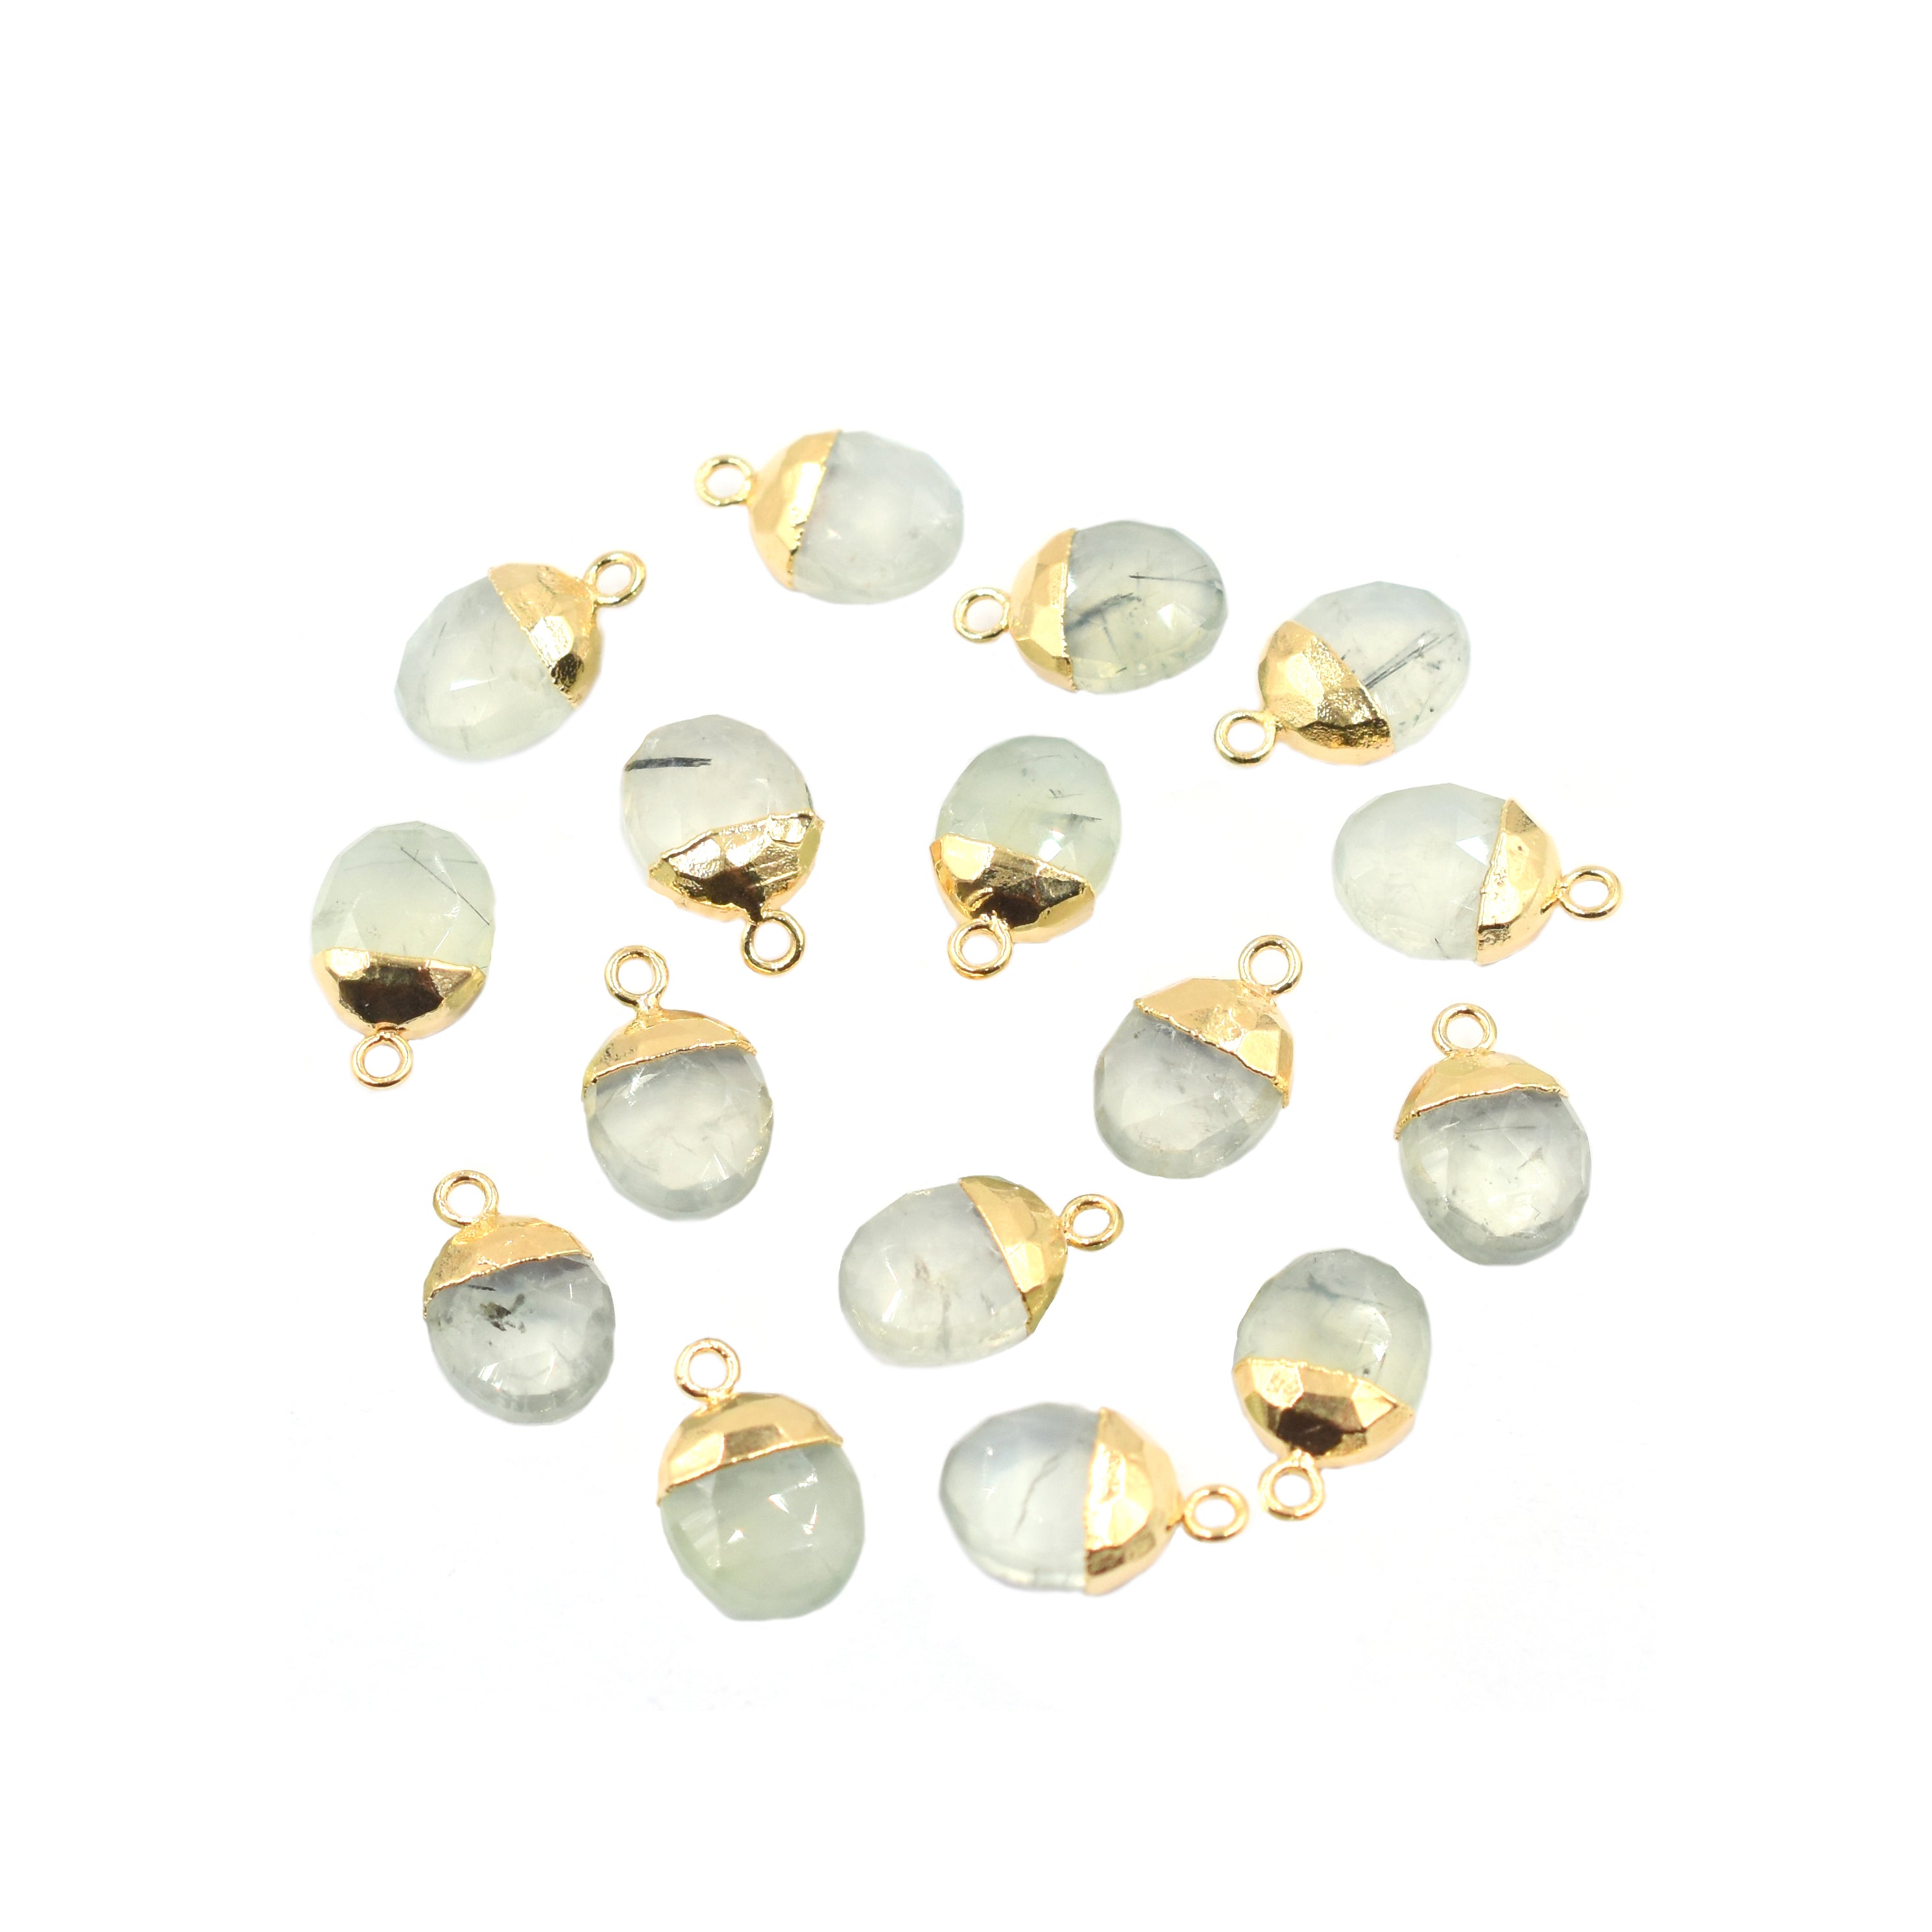 Prehnite 10X8 MM Oval Shape Gold Electroplated Pendant (Set Of 2 Pcs)